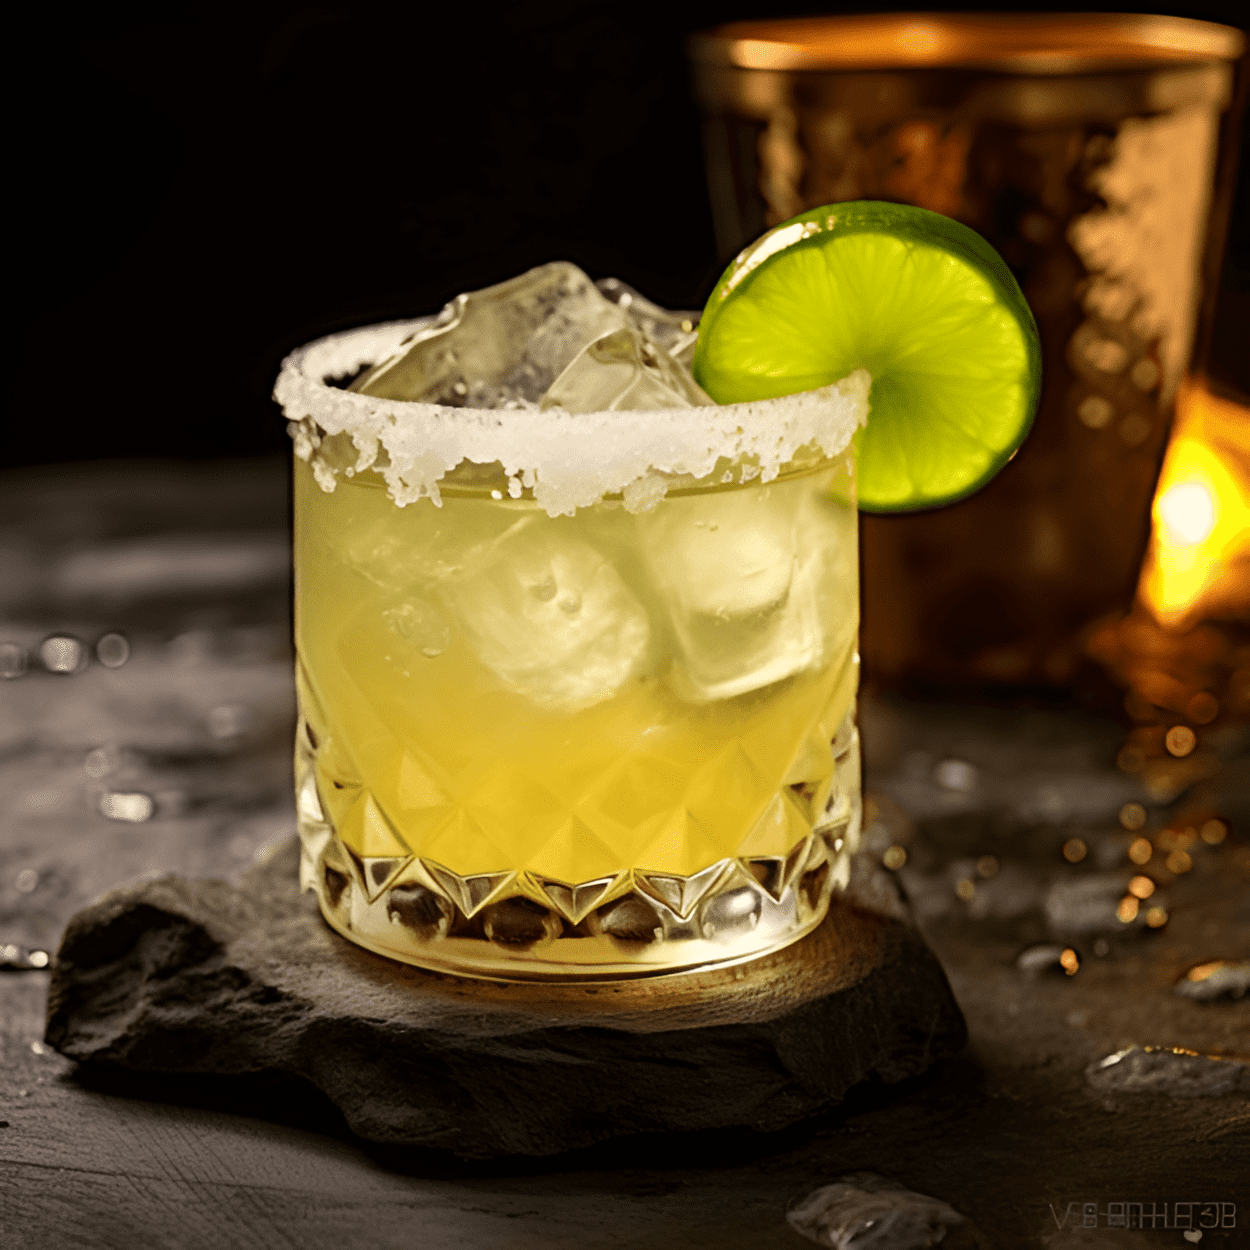 Skull Crusher Cocktail Recipe - The Skull Crusher is a strong, potent cocktail with a robust flavor. It's not overly sweet, but has a certain bitterness to it that's balanced out by the strong alcohol content. The taste is complex, with notes of citrus, spice, and a hint of sweetness.